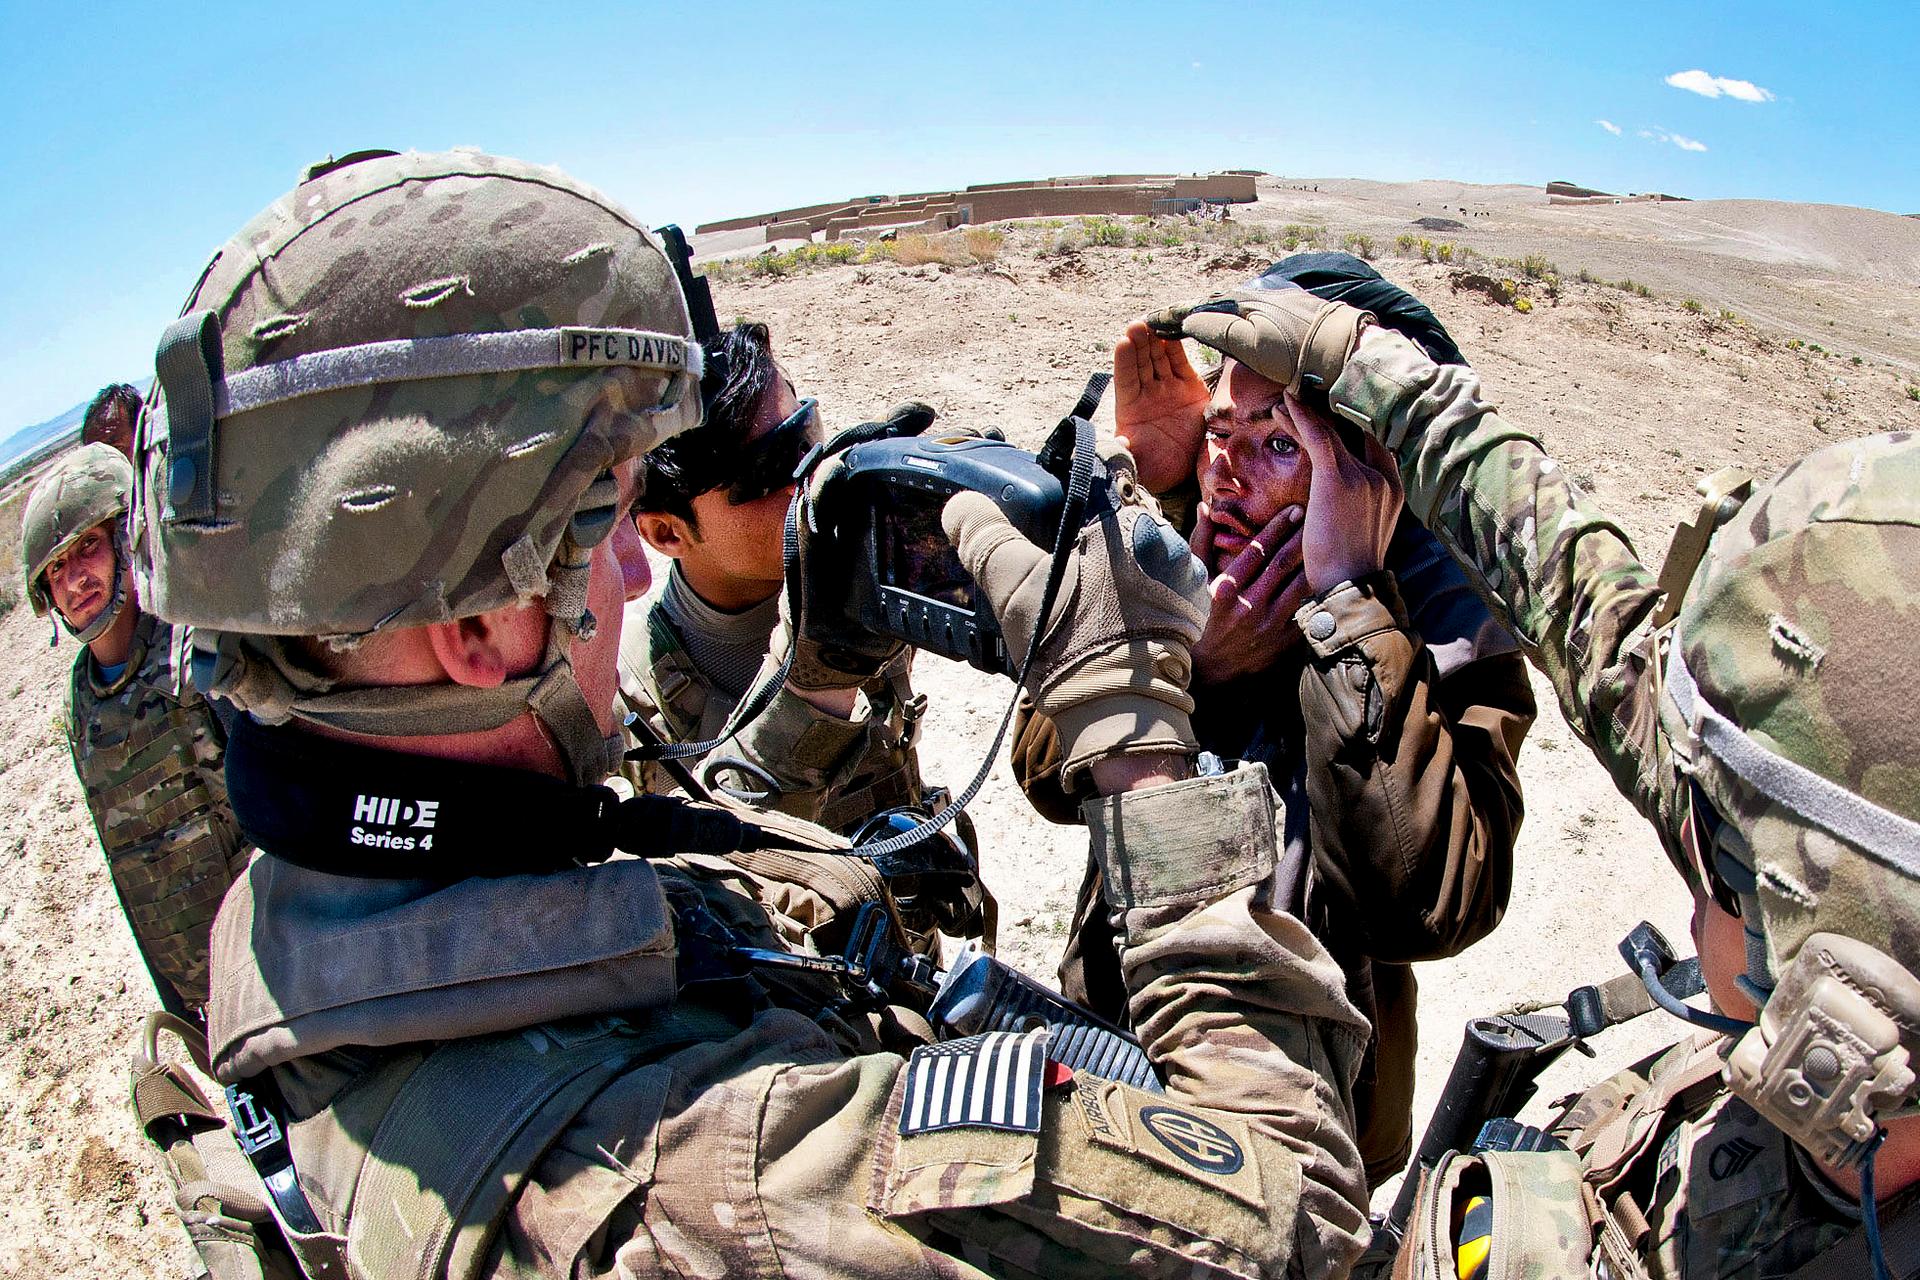 U.S. paratroopers scan the eye of an Afghan civilian. One soldier shields the young man's eyes from the sun while another uses a scanner..